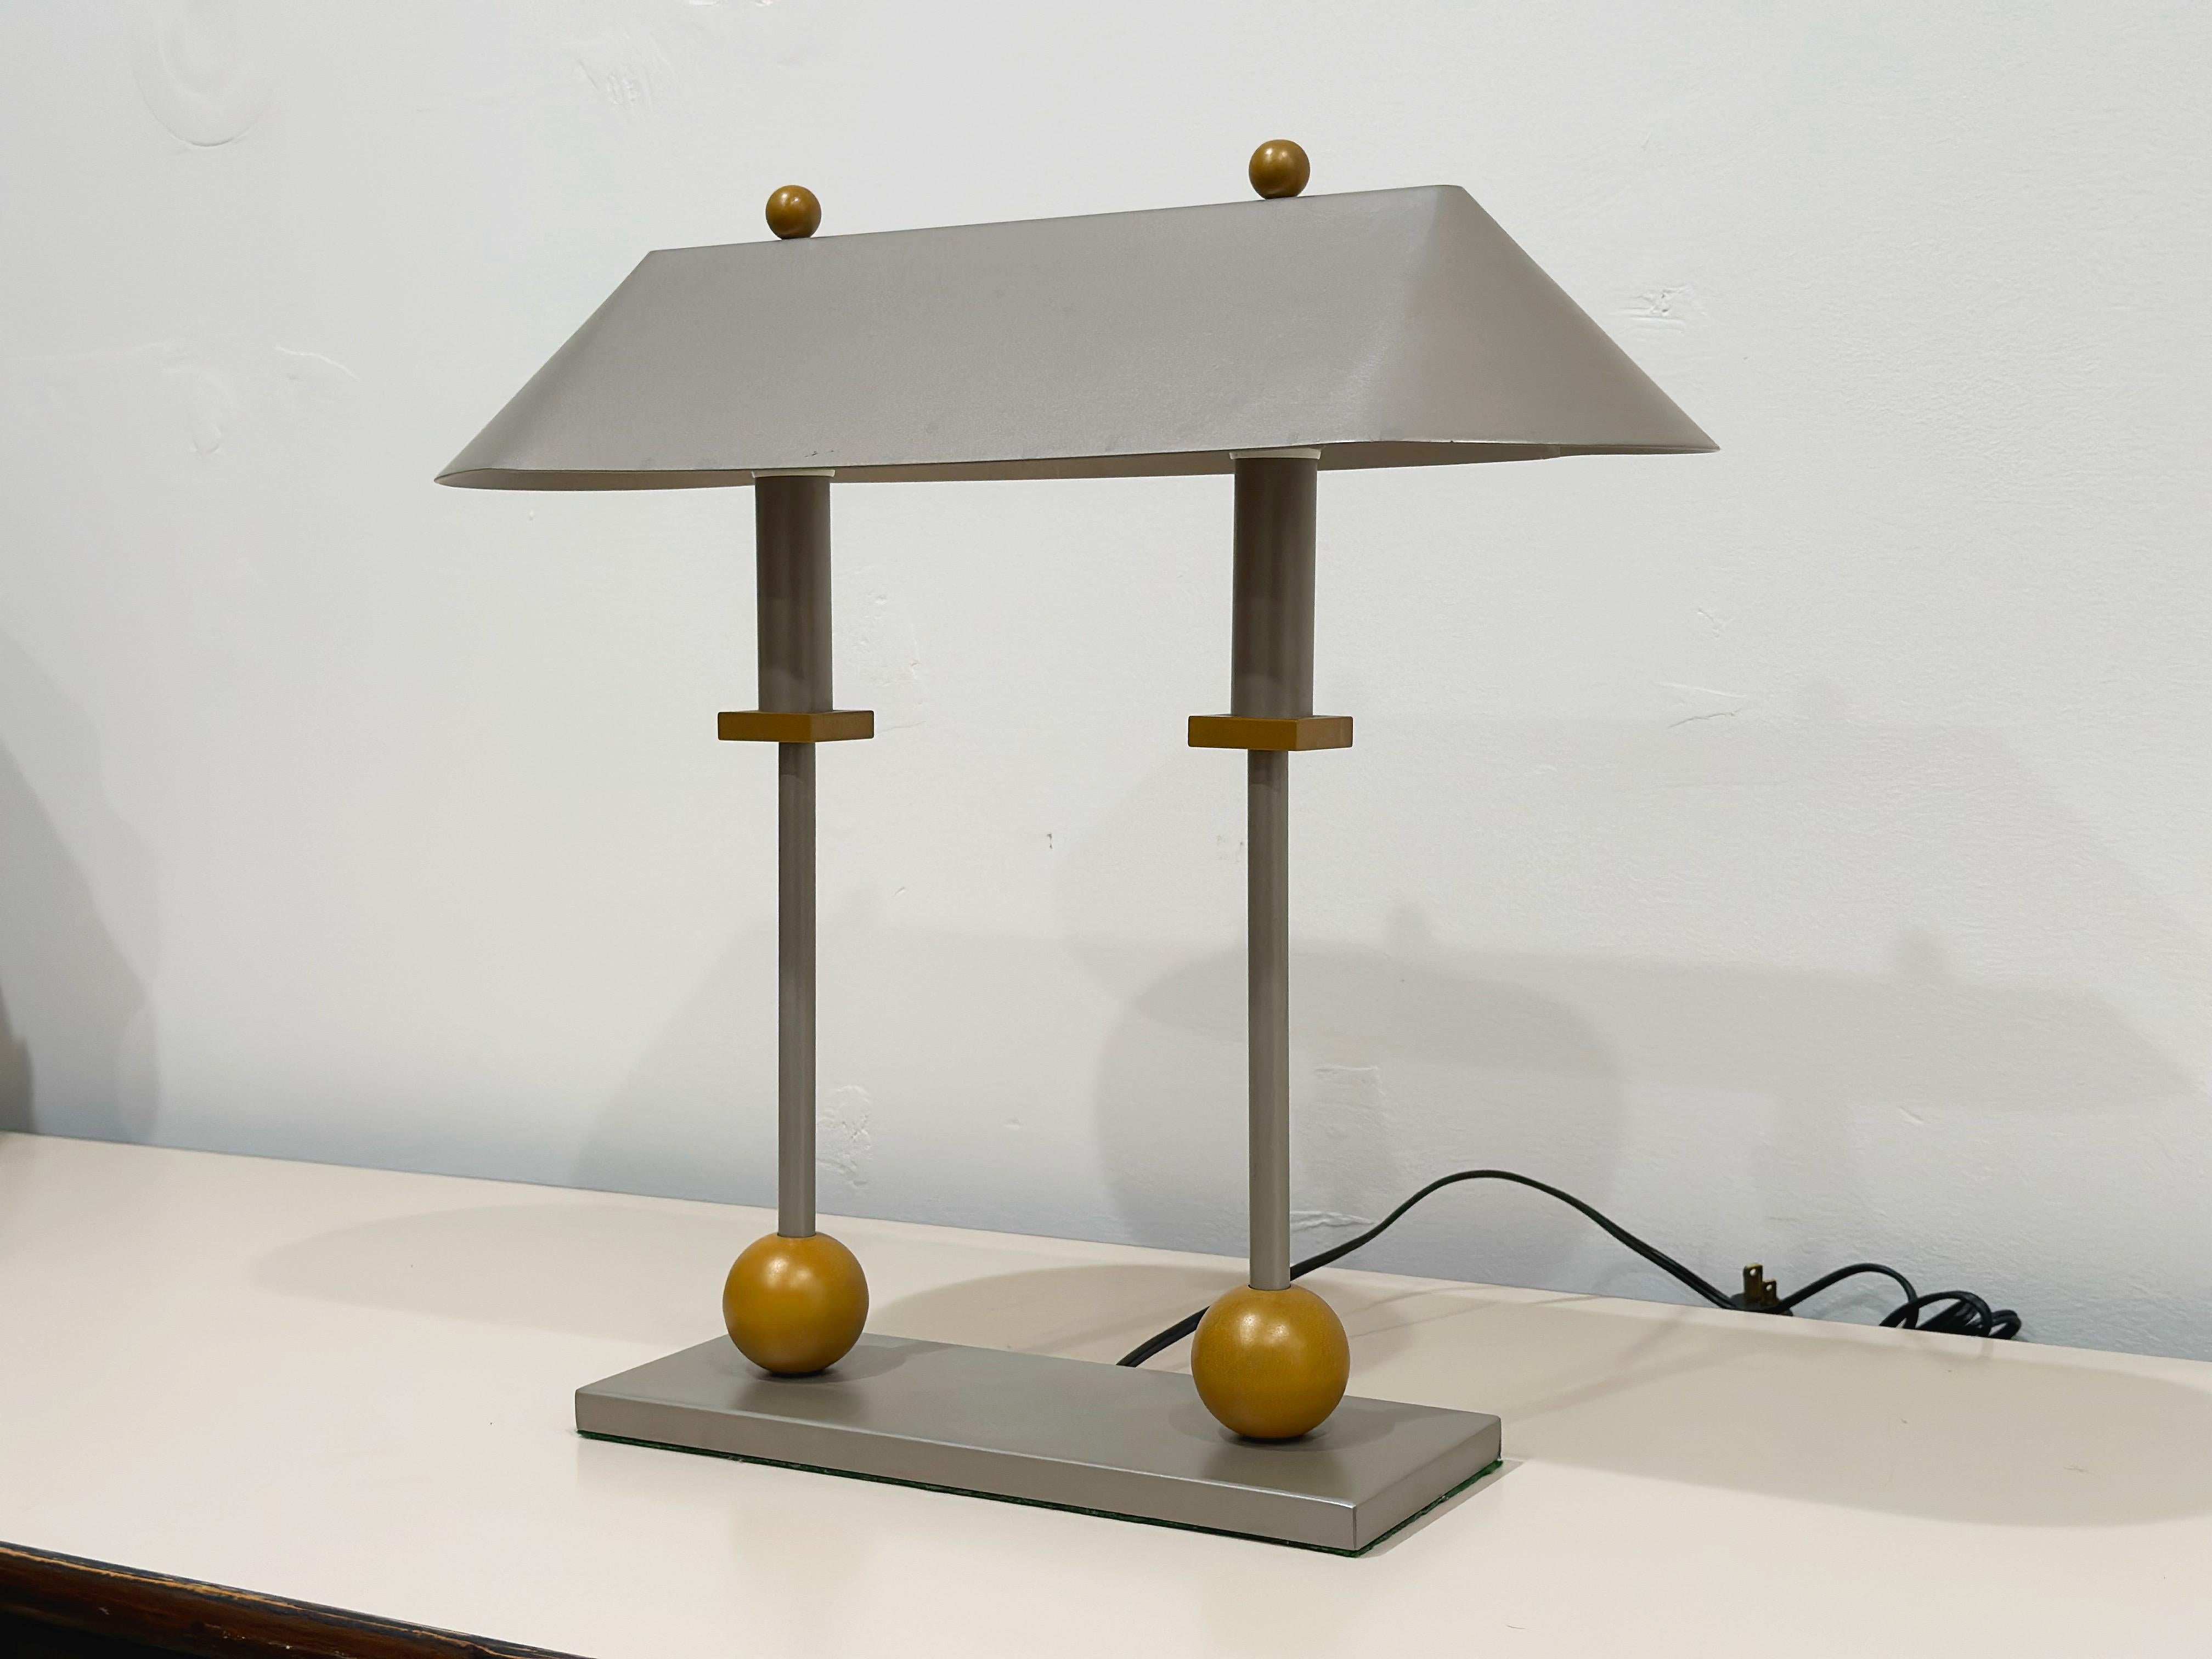 Rare bankers lamp form, Post Modern - Memphis Milano style, desk lamp designed by Robert Sonneman for George Kovacs circa 1980s. The base is of two tone metal, silver gray, with mat finish brass decorative trim elements. The lamp is in excellent